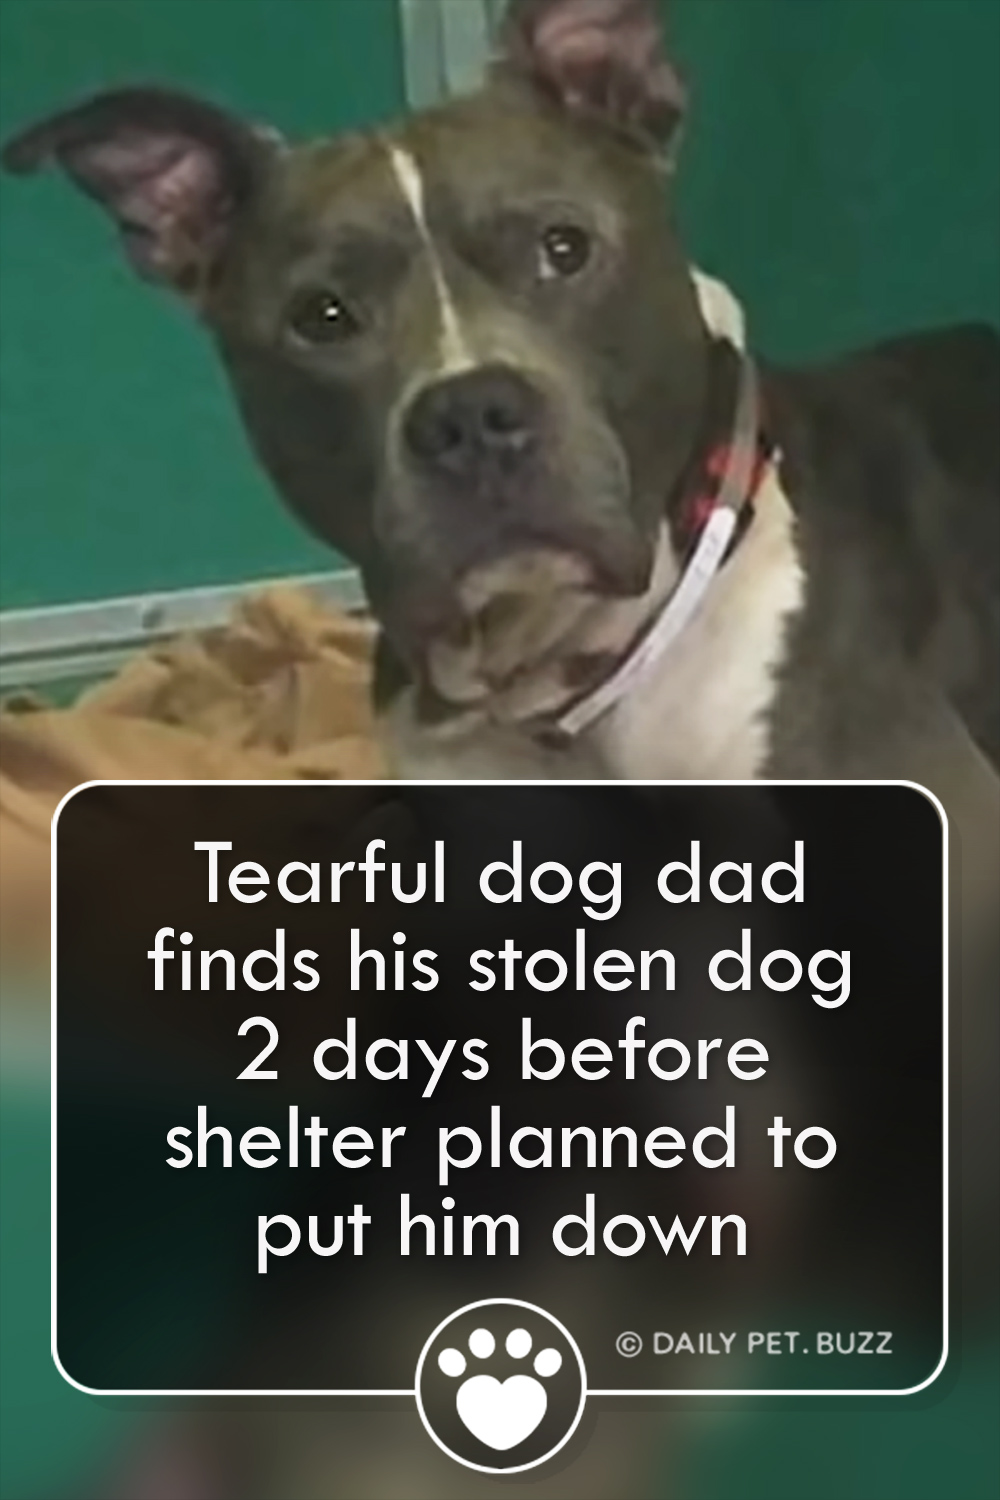 Tearful dog dad finds his stolen dog 2 days before shelter planned to put him down